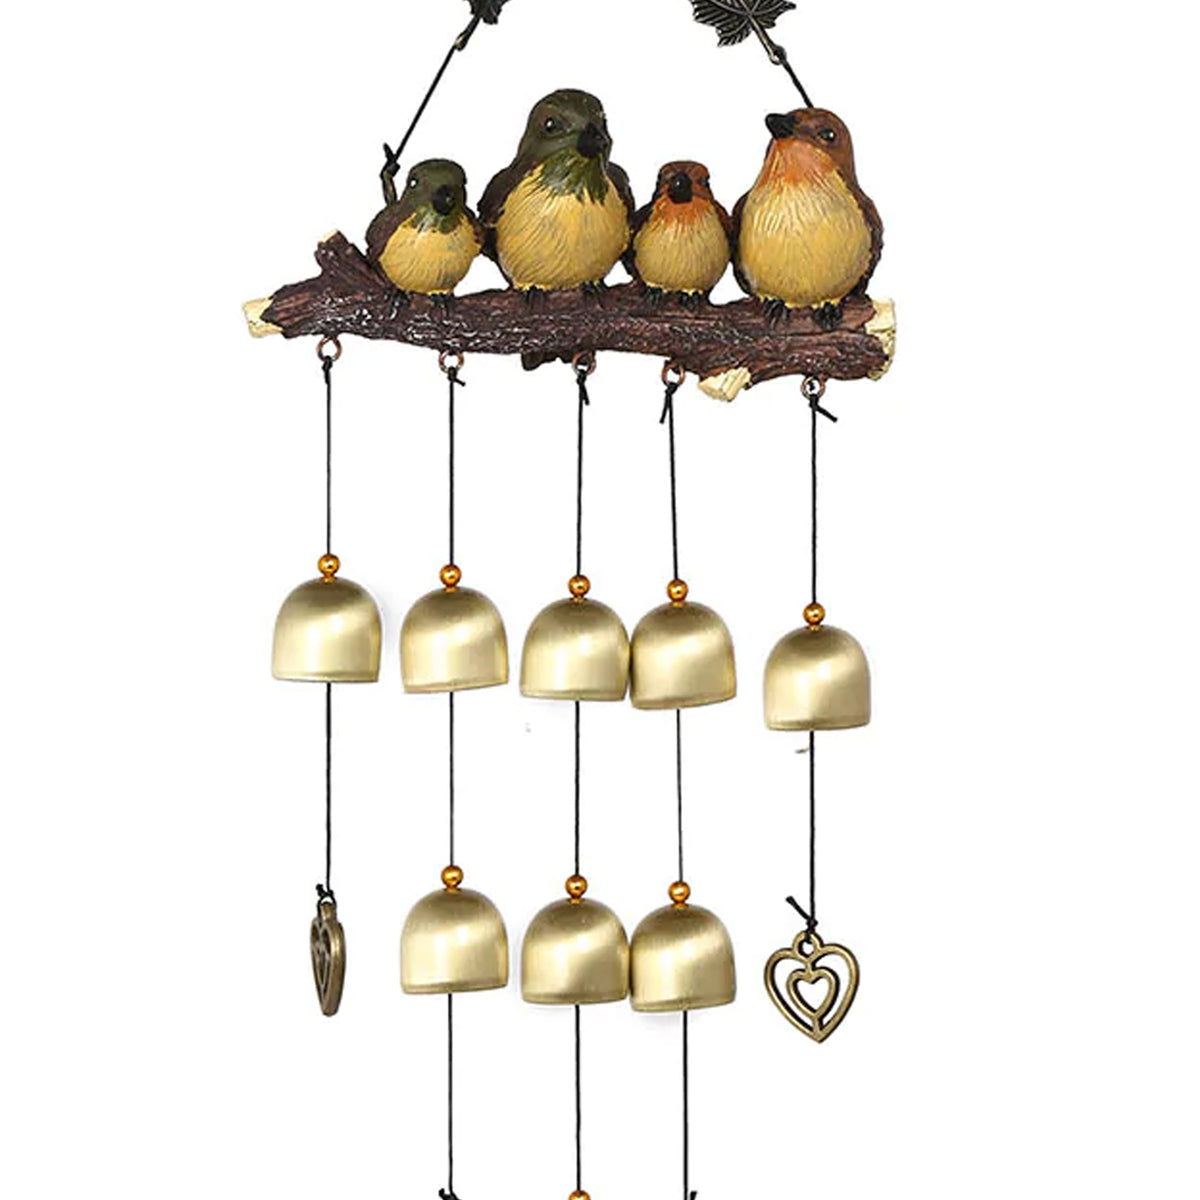 Hanging Bird on a Branch Large Windchime (Gold)